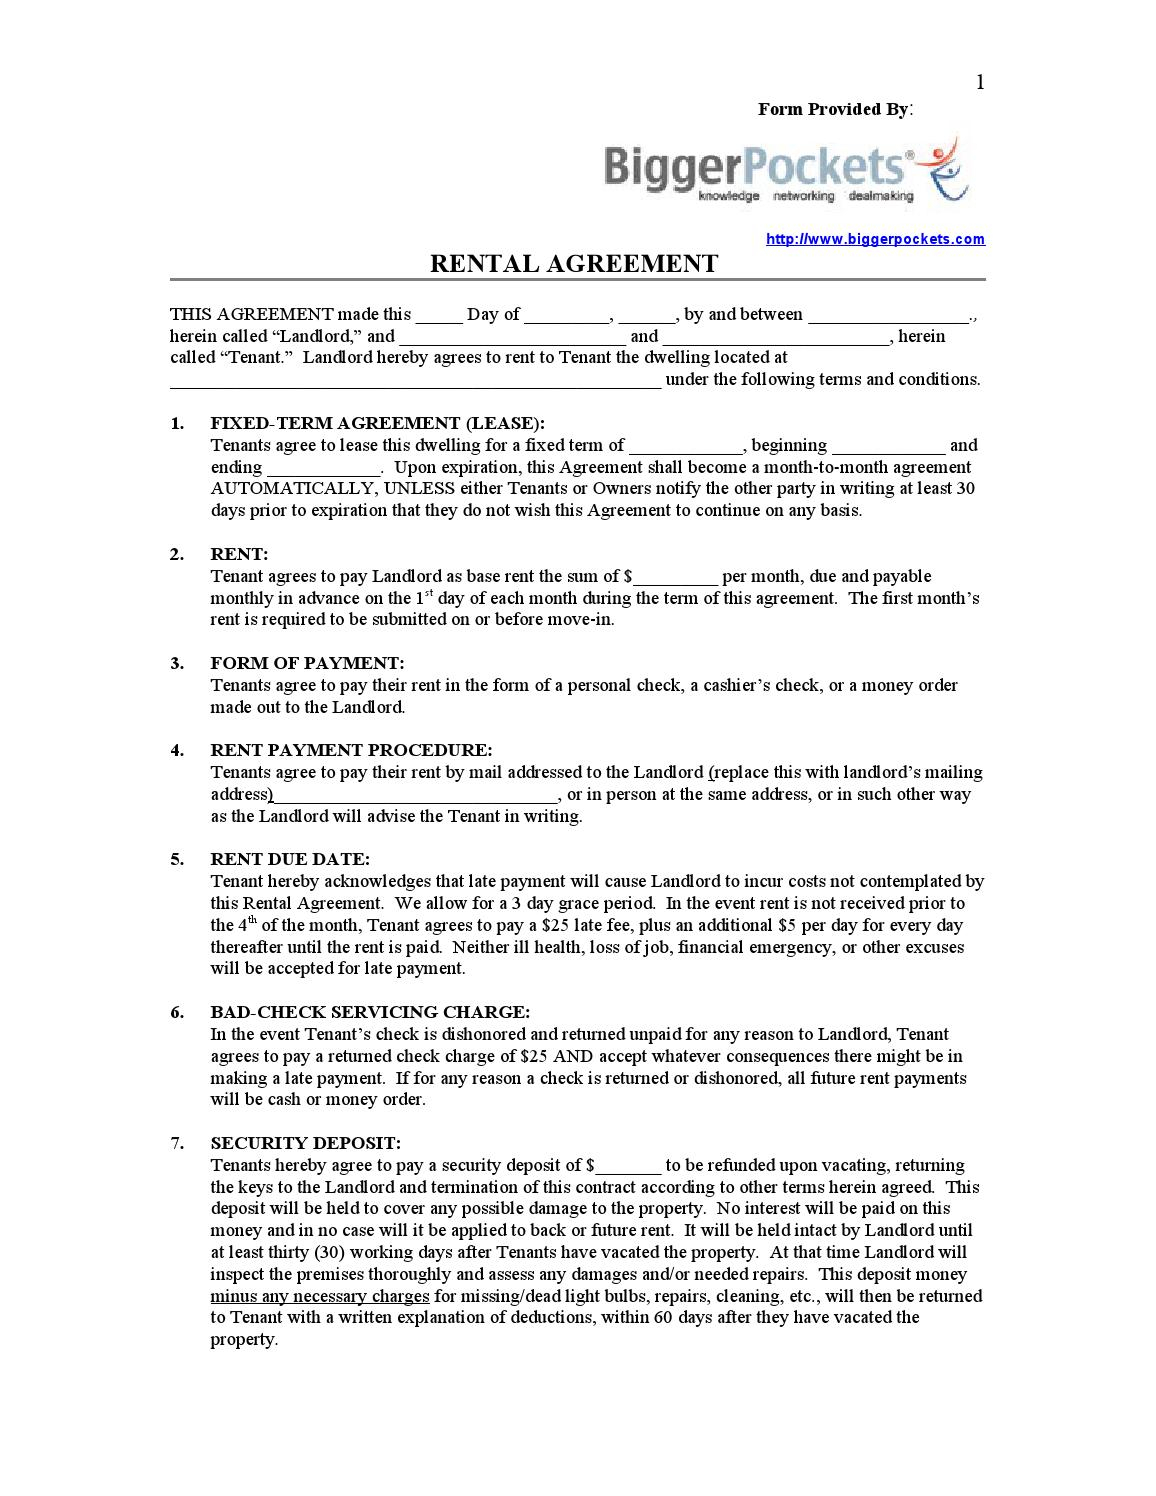 Contract - Rental Agreement by Future Kulture - issuu Intended For No Deposit Tenancy Agreement Template With No Deposit Tenancy Agreement Template